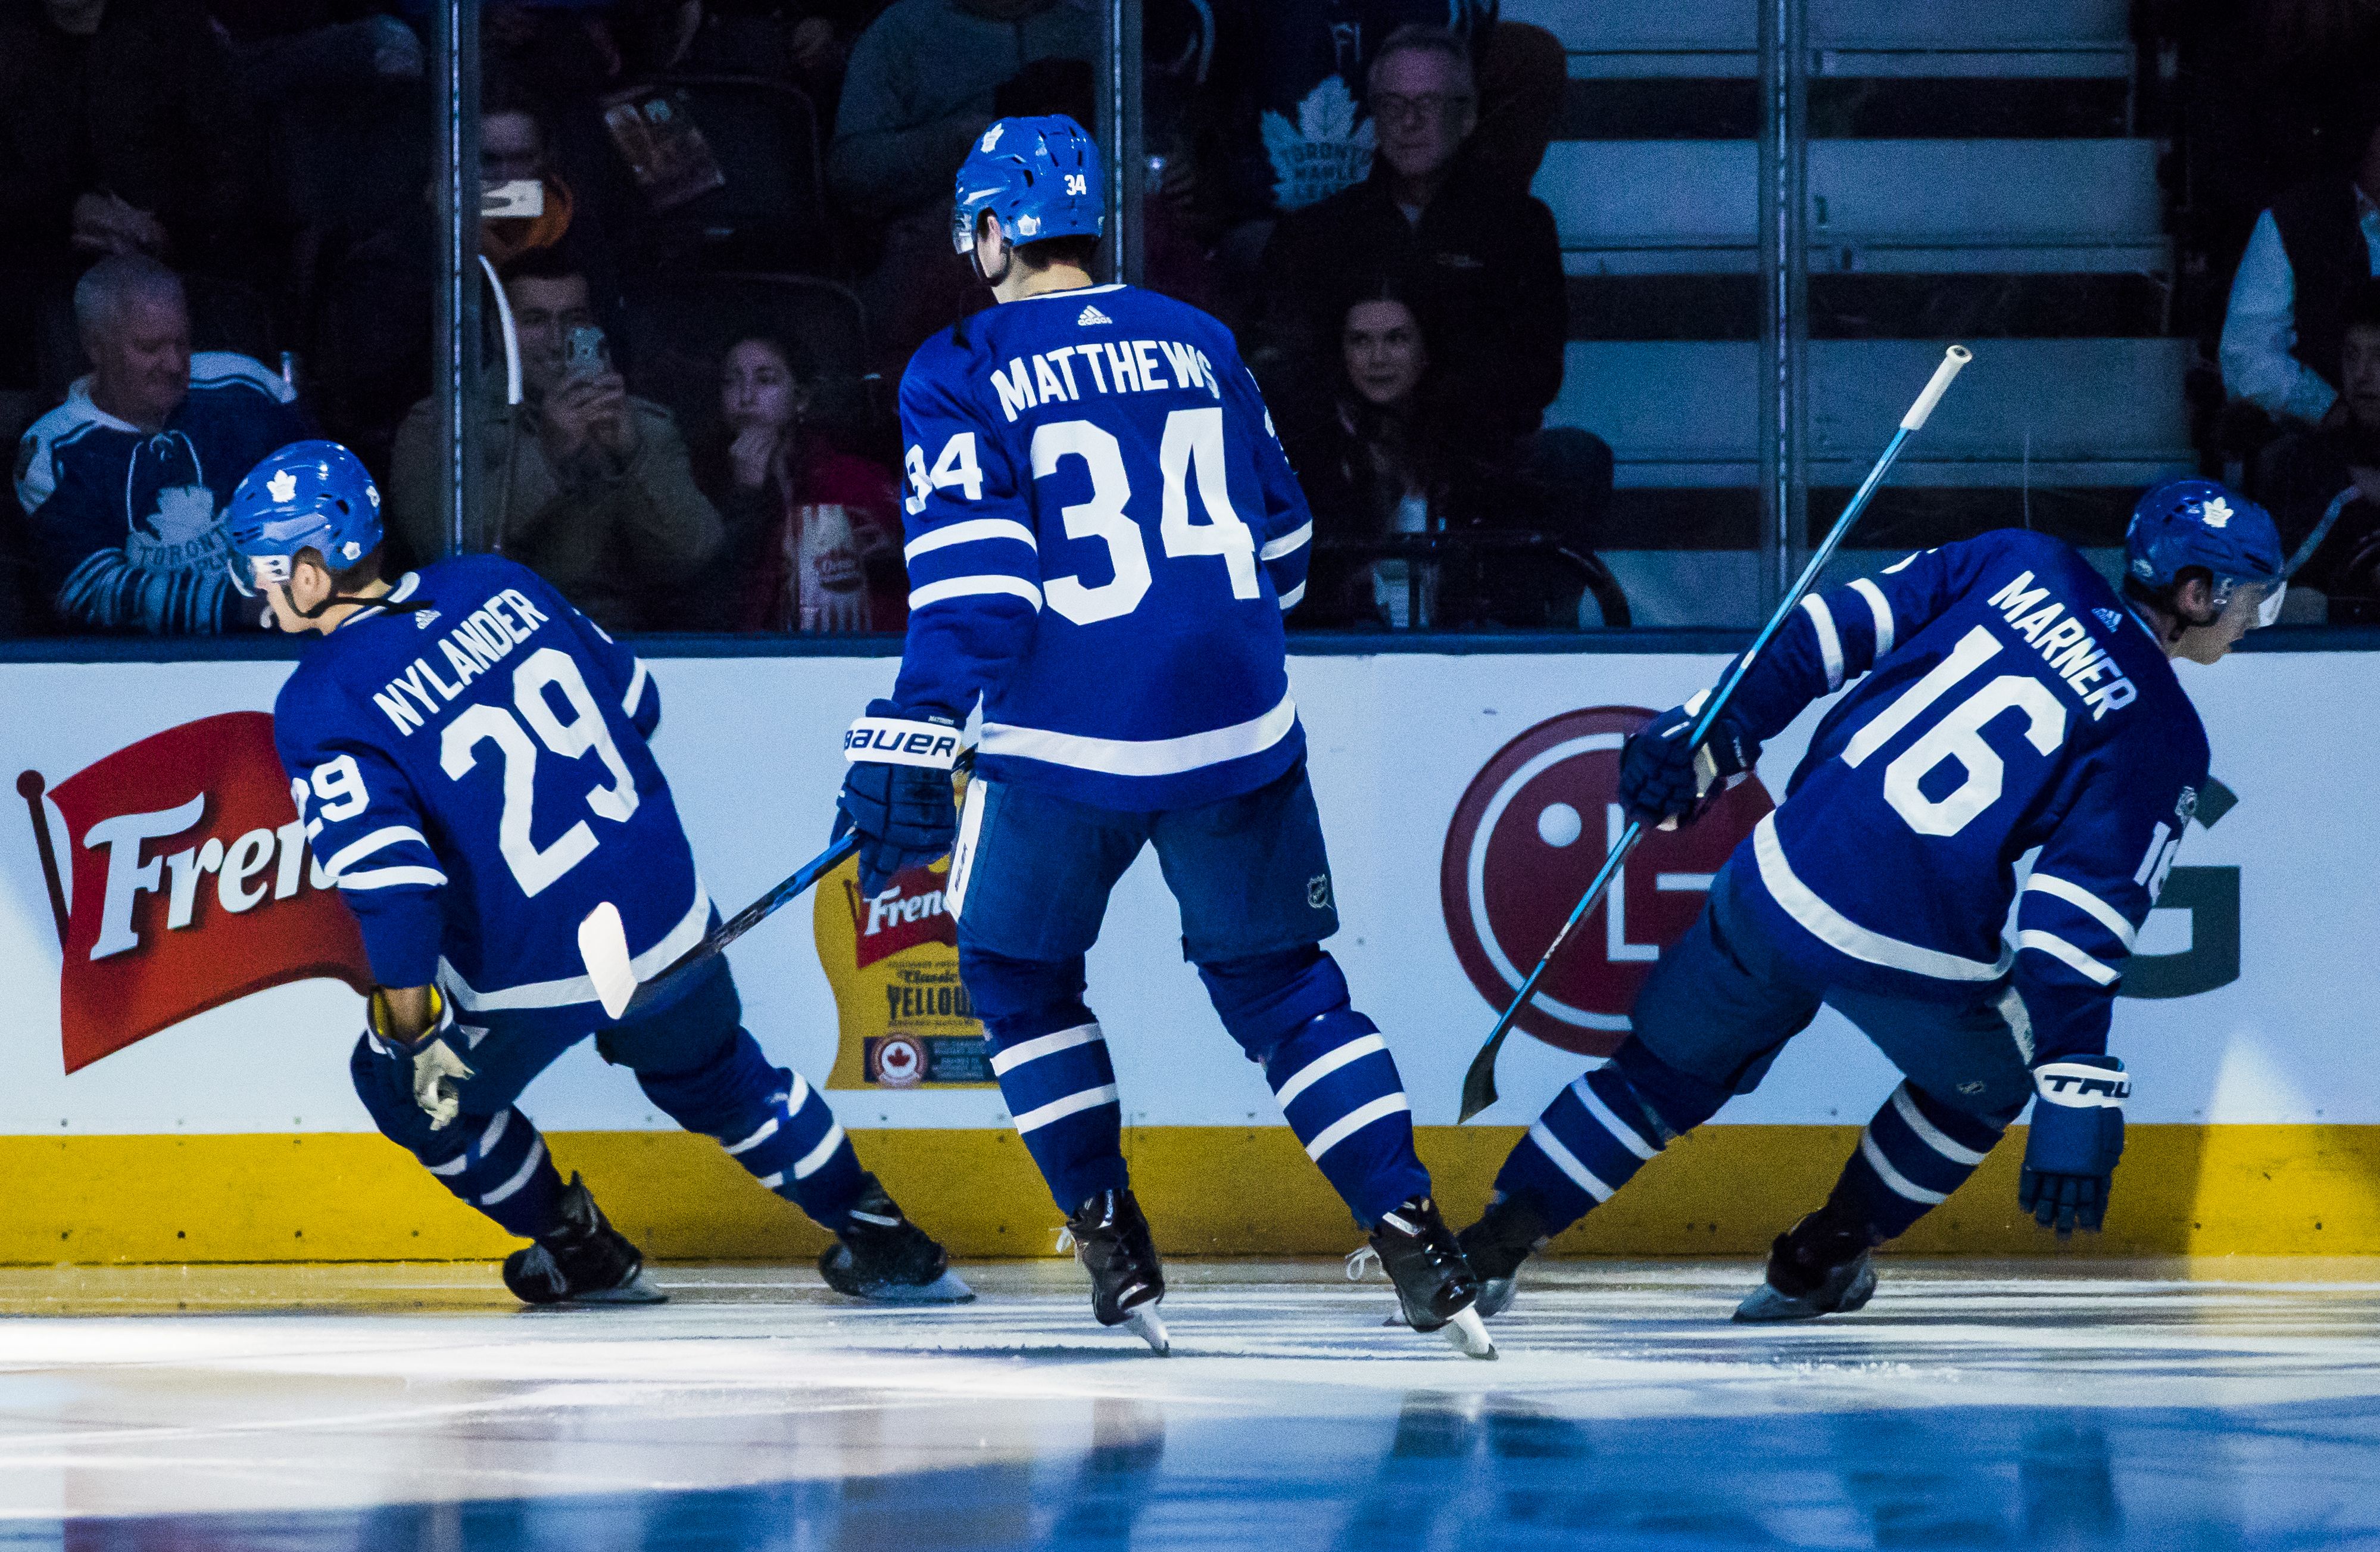 Toronto Maple Leafs: Best Team in the NHL